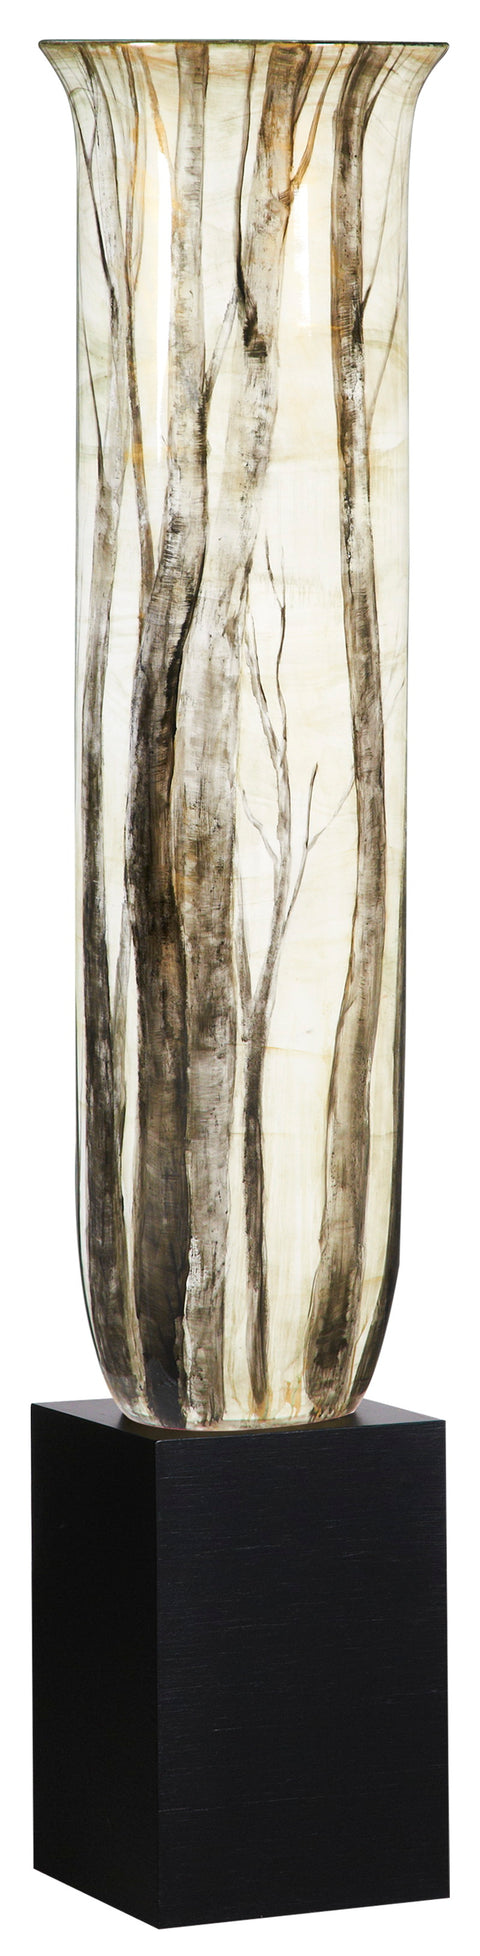 Grand Birch Branches Vase on Stand